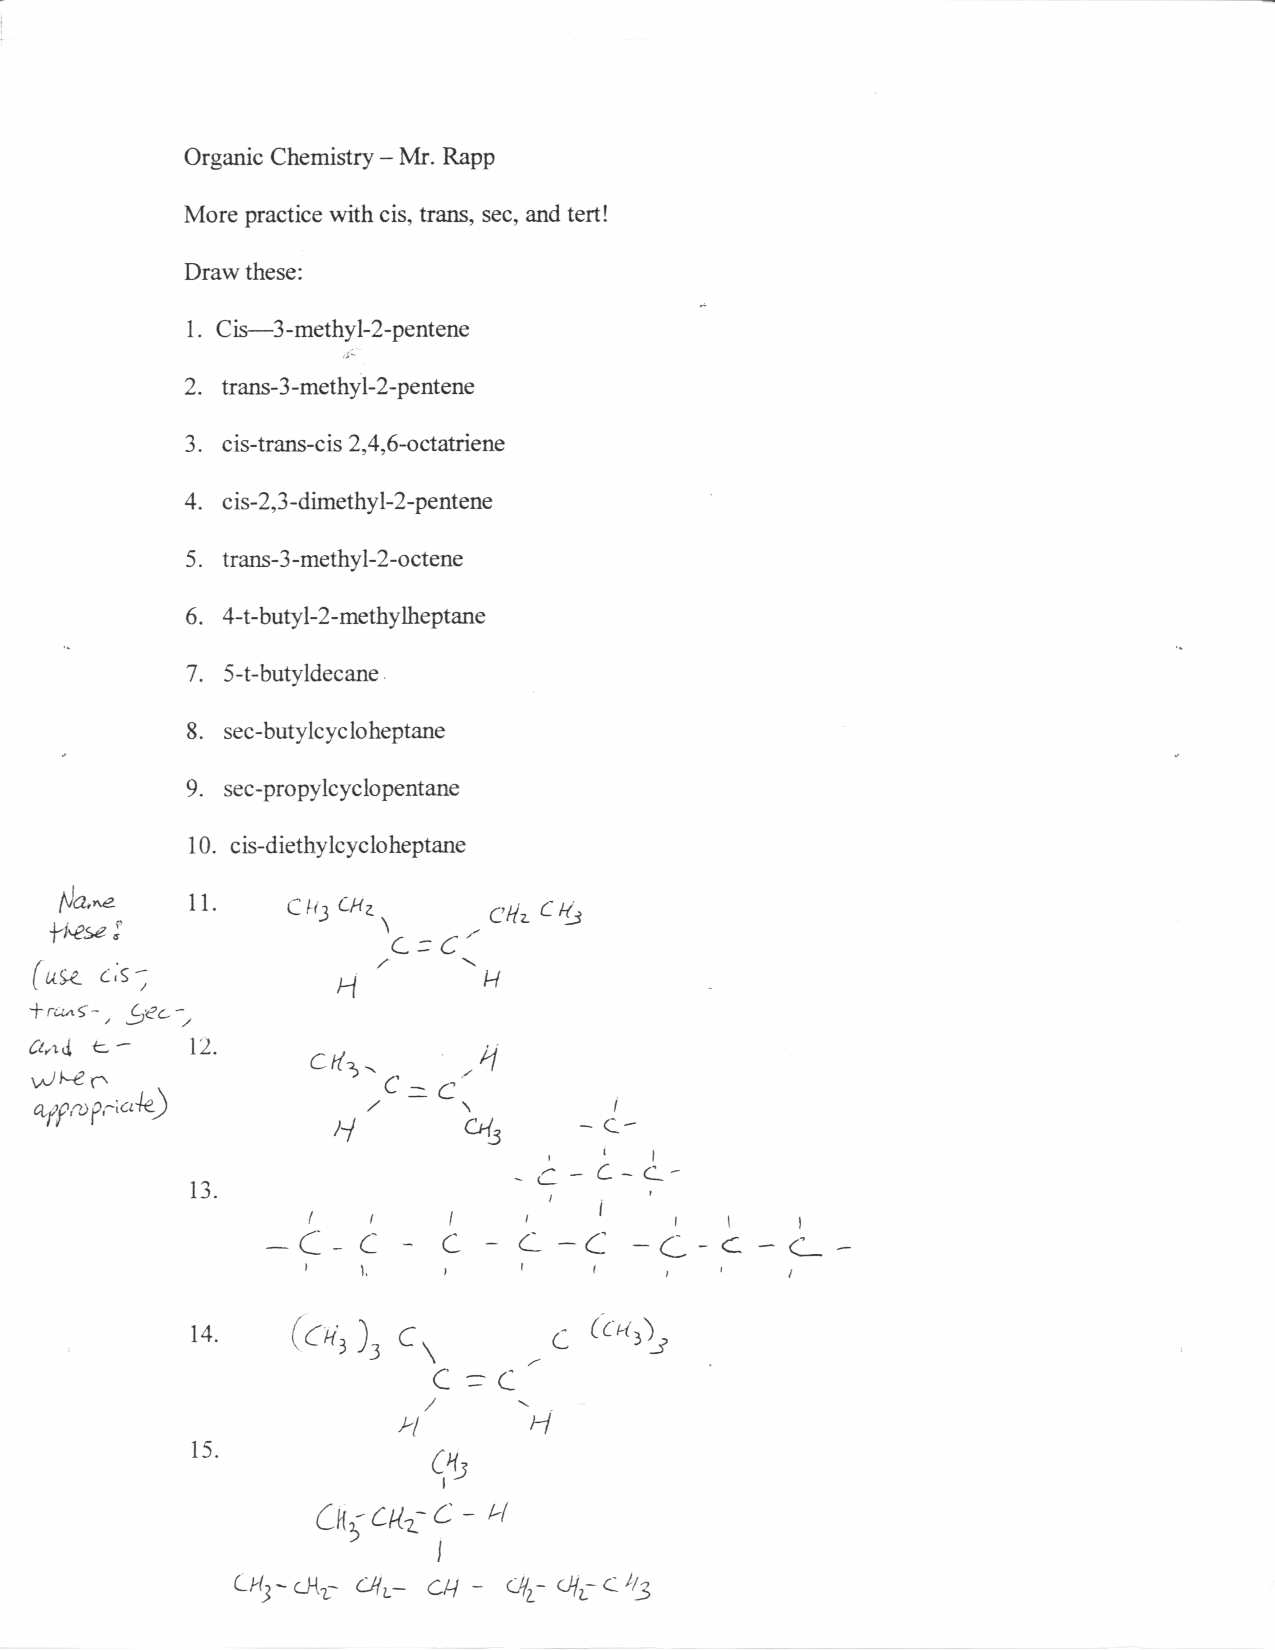 Organic Chemistry Nomenclature Worksheets with Answers